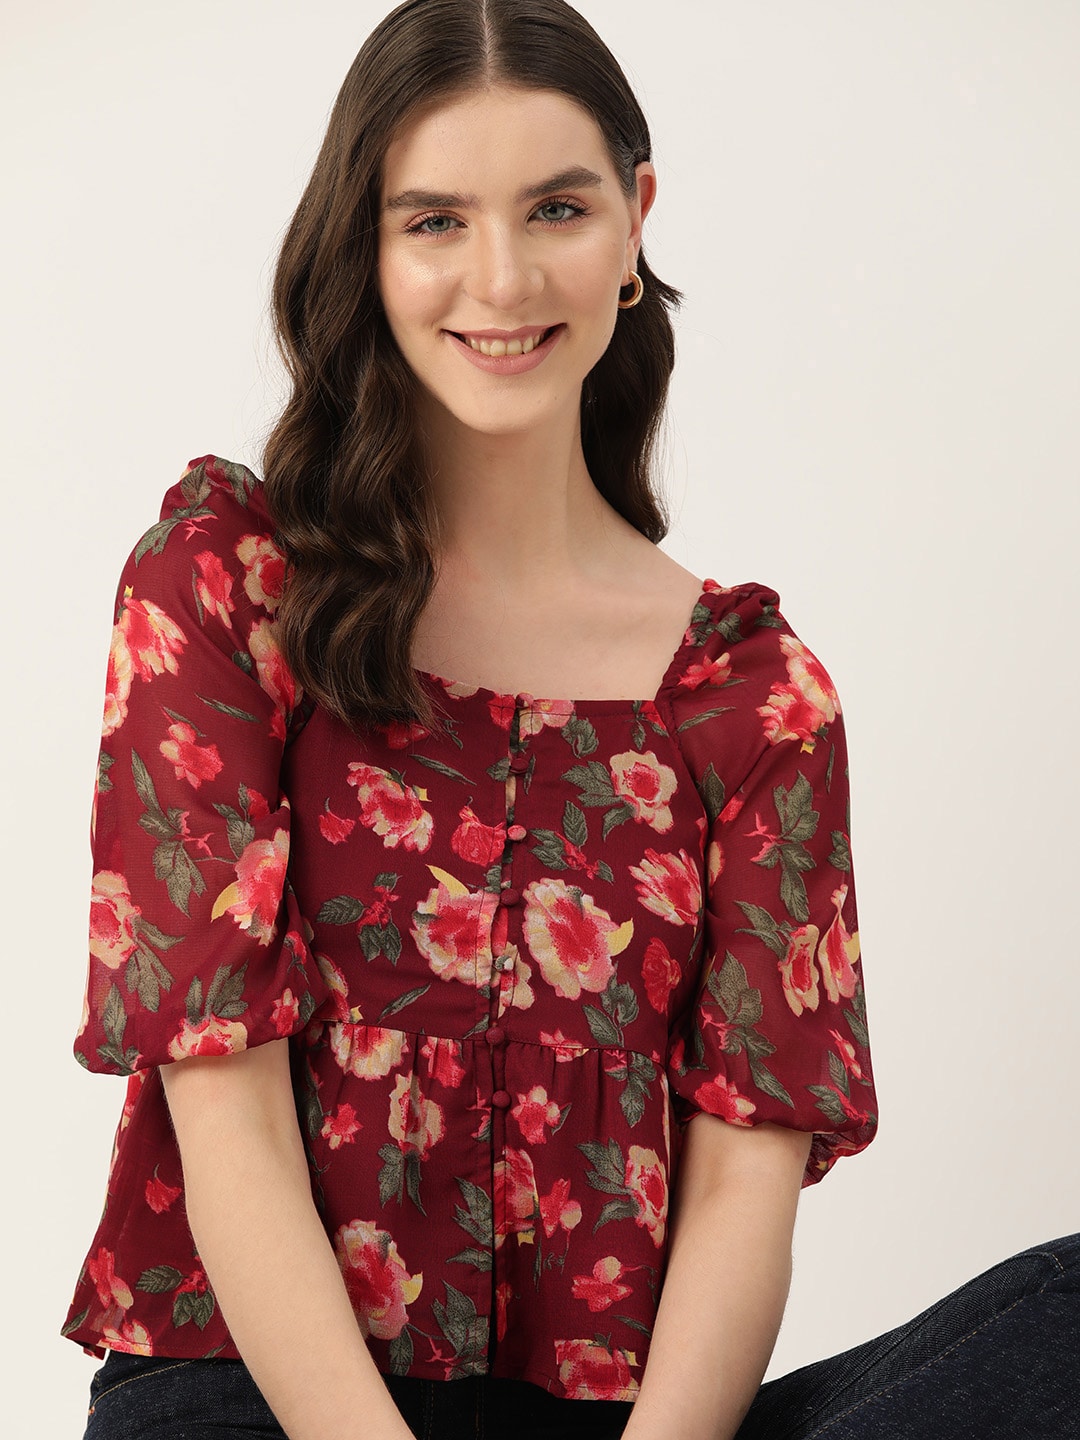 Mast & Harbour Floral Print Top Price in India